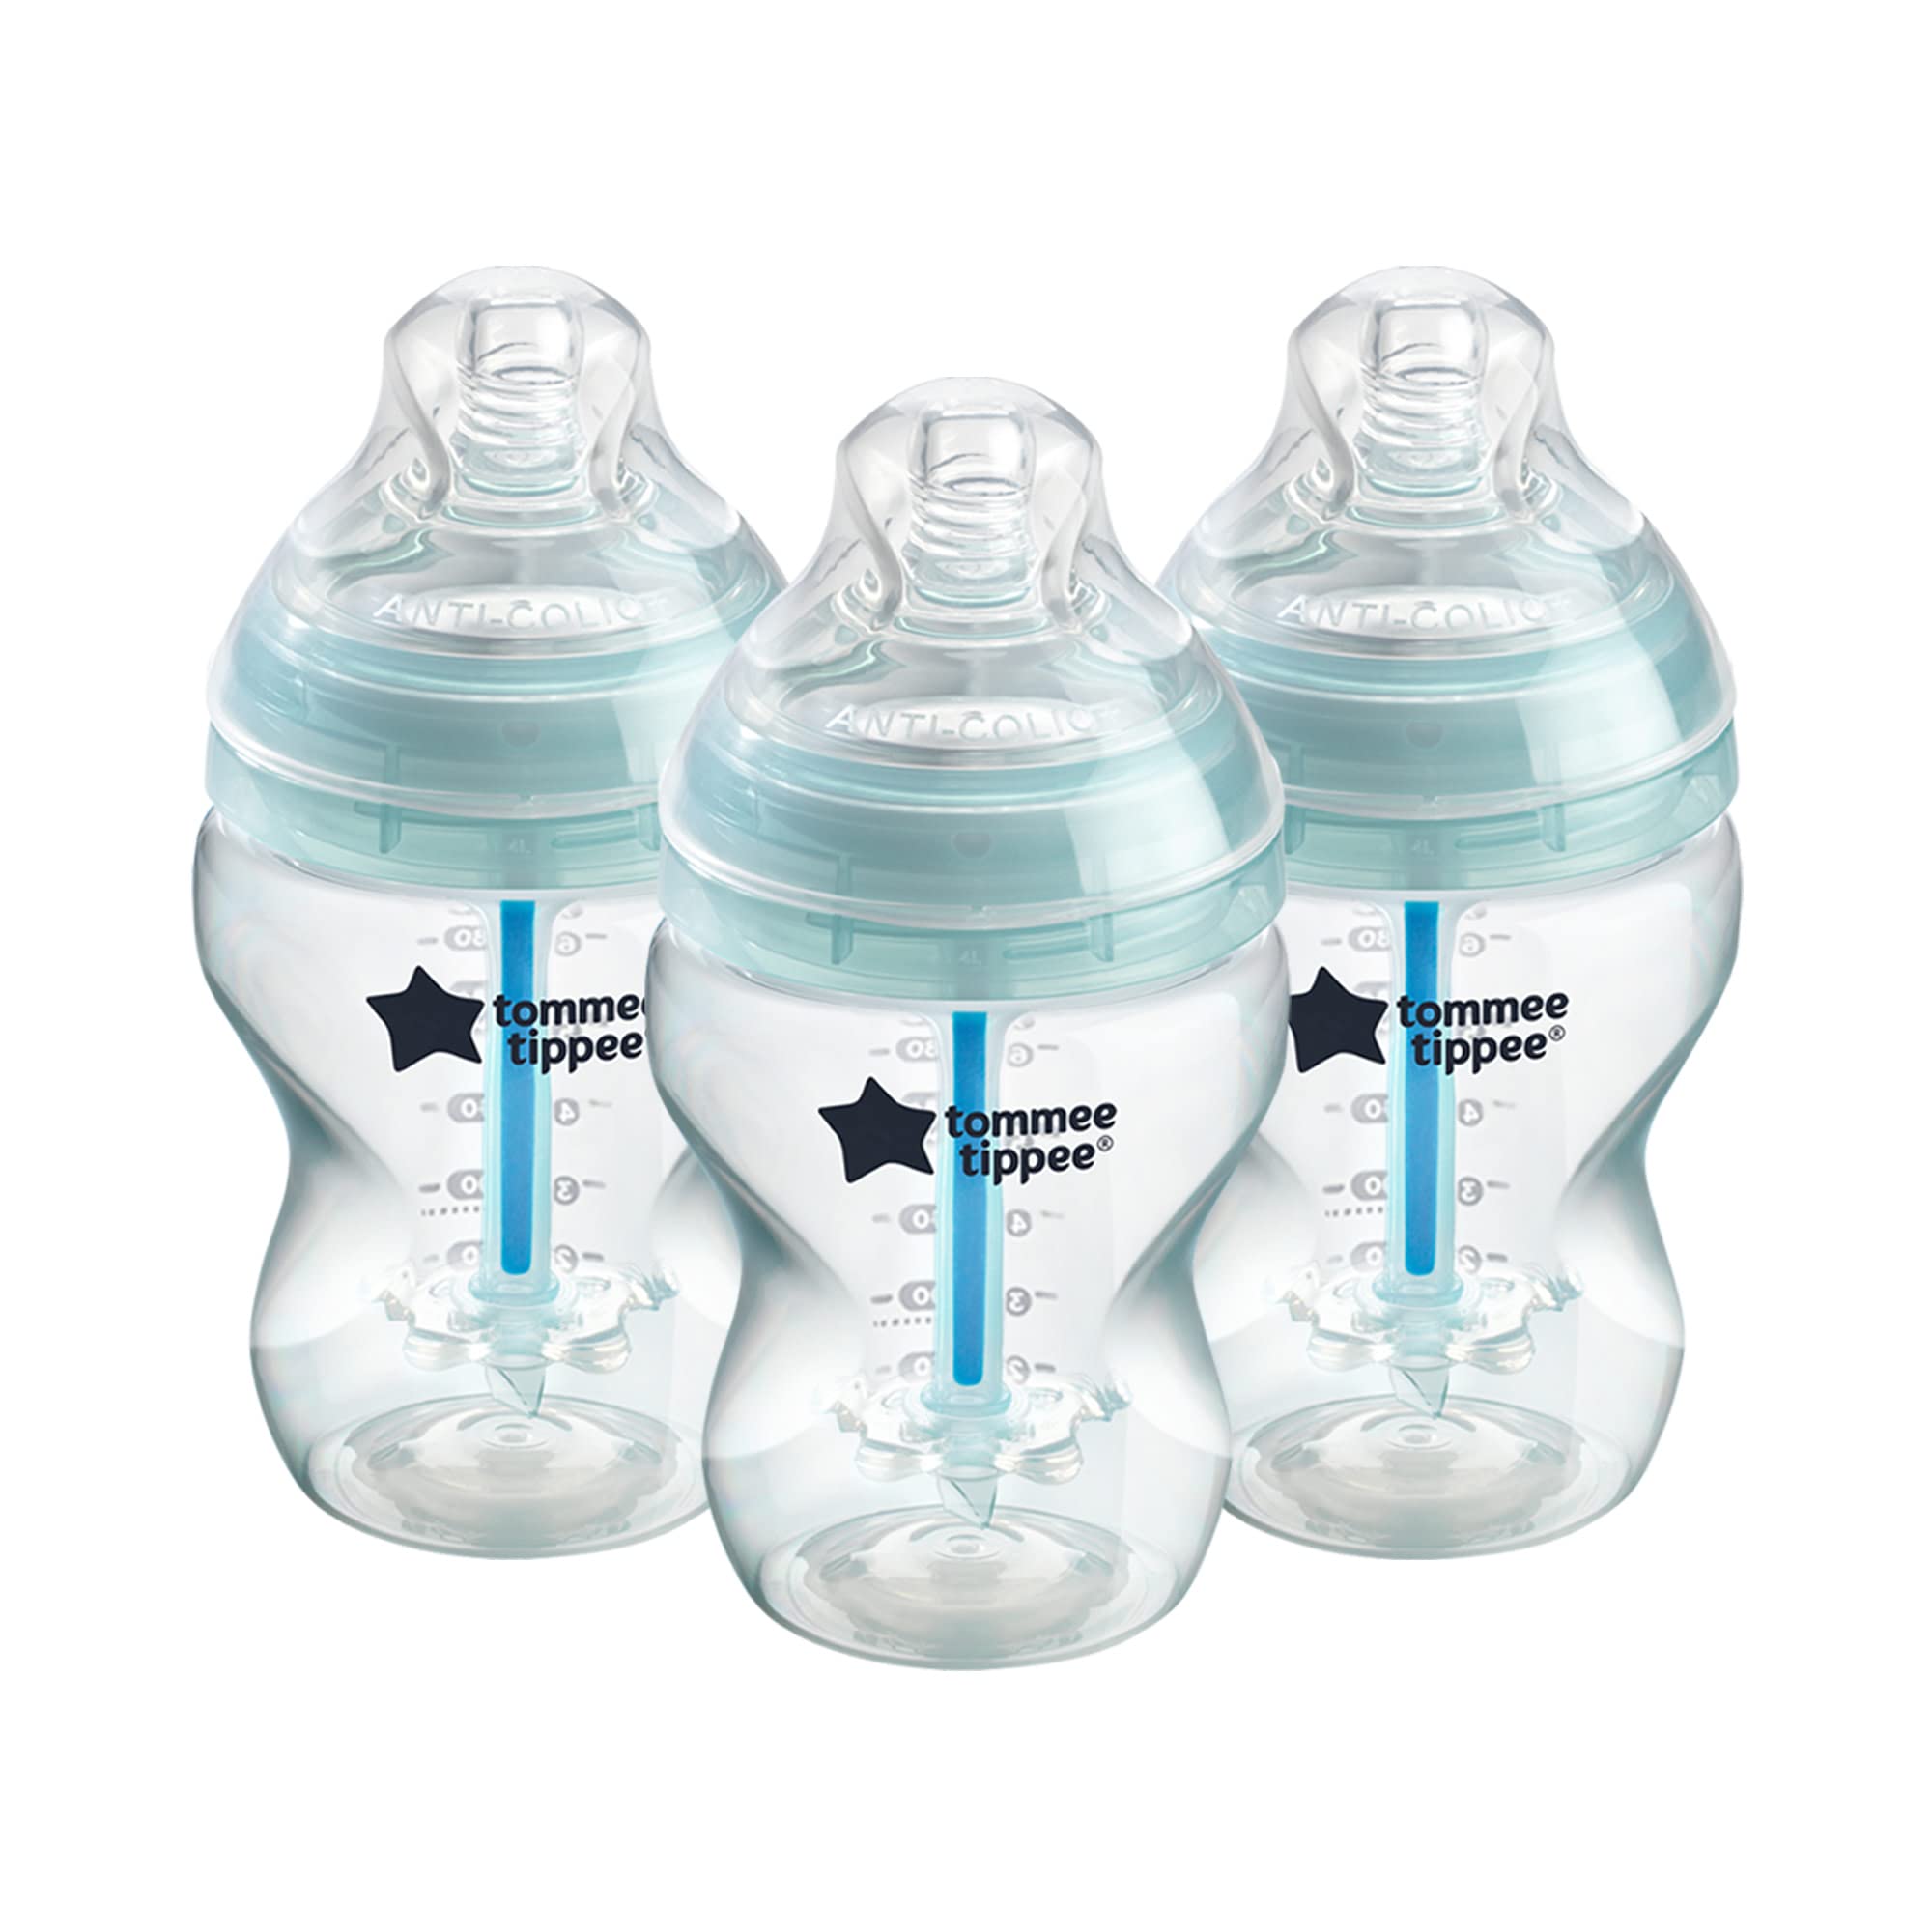 Tommee Tippee Anti-Colic Baby Bottles Slow Flow Breast-Like Nipple and  Unique Anti-Colic Venting System (9oz 3 Count)